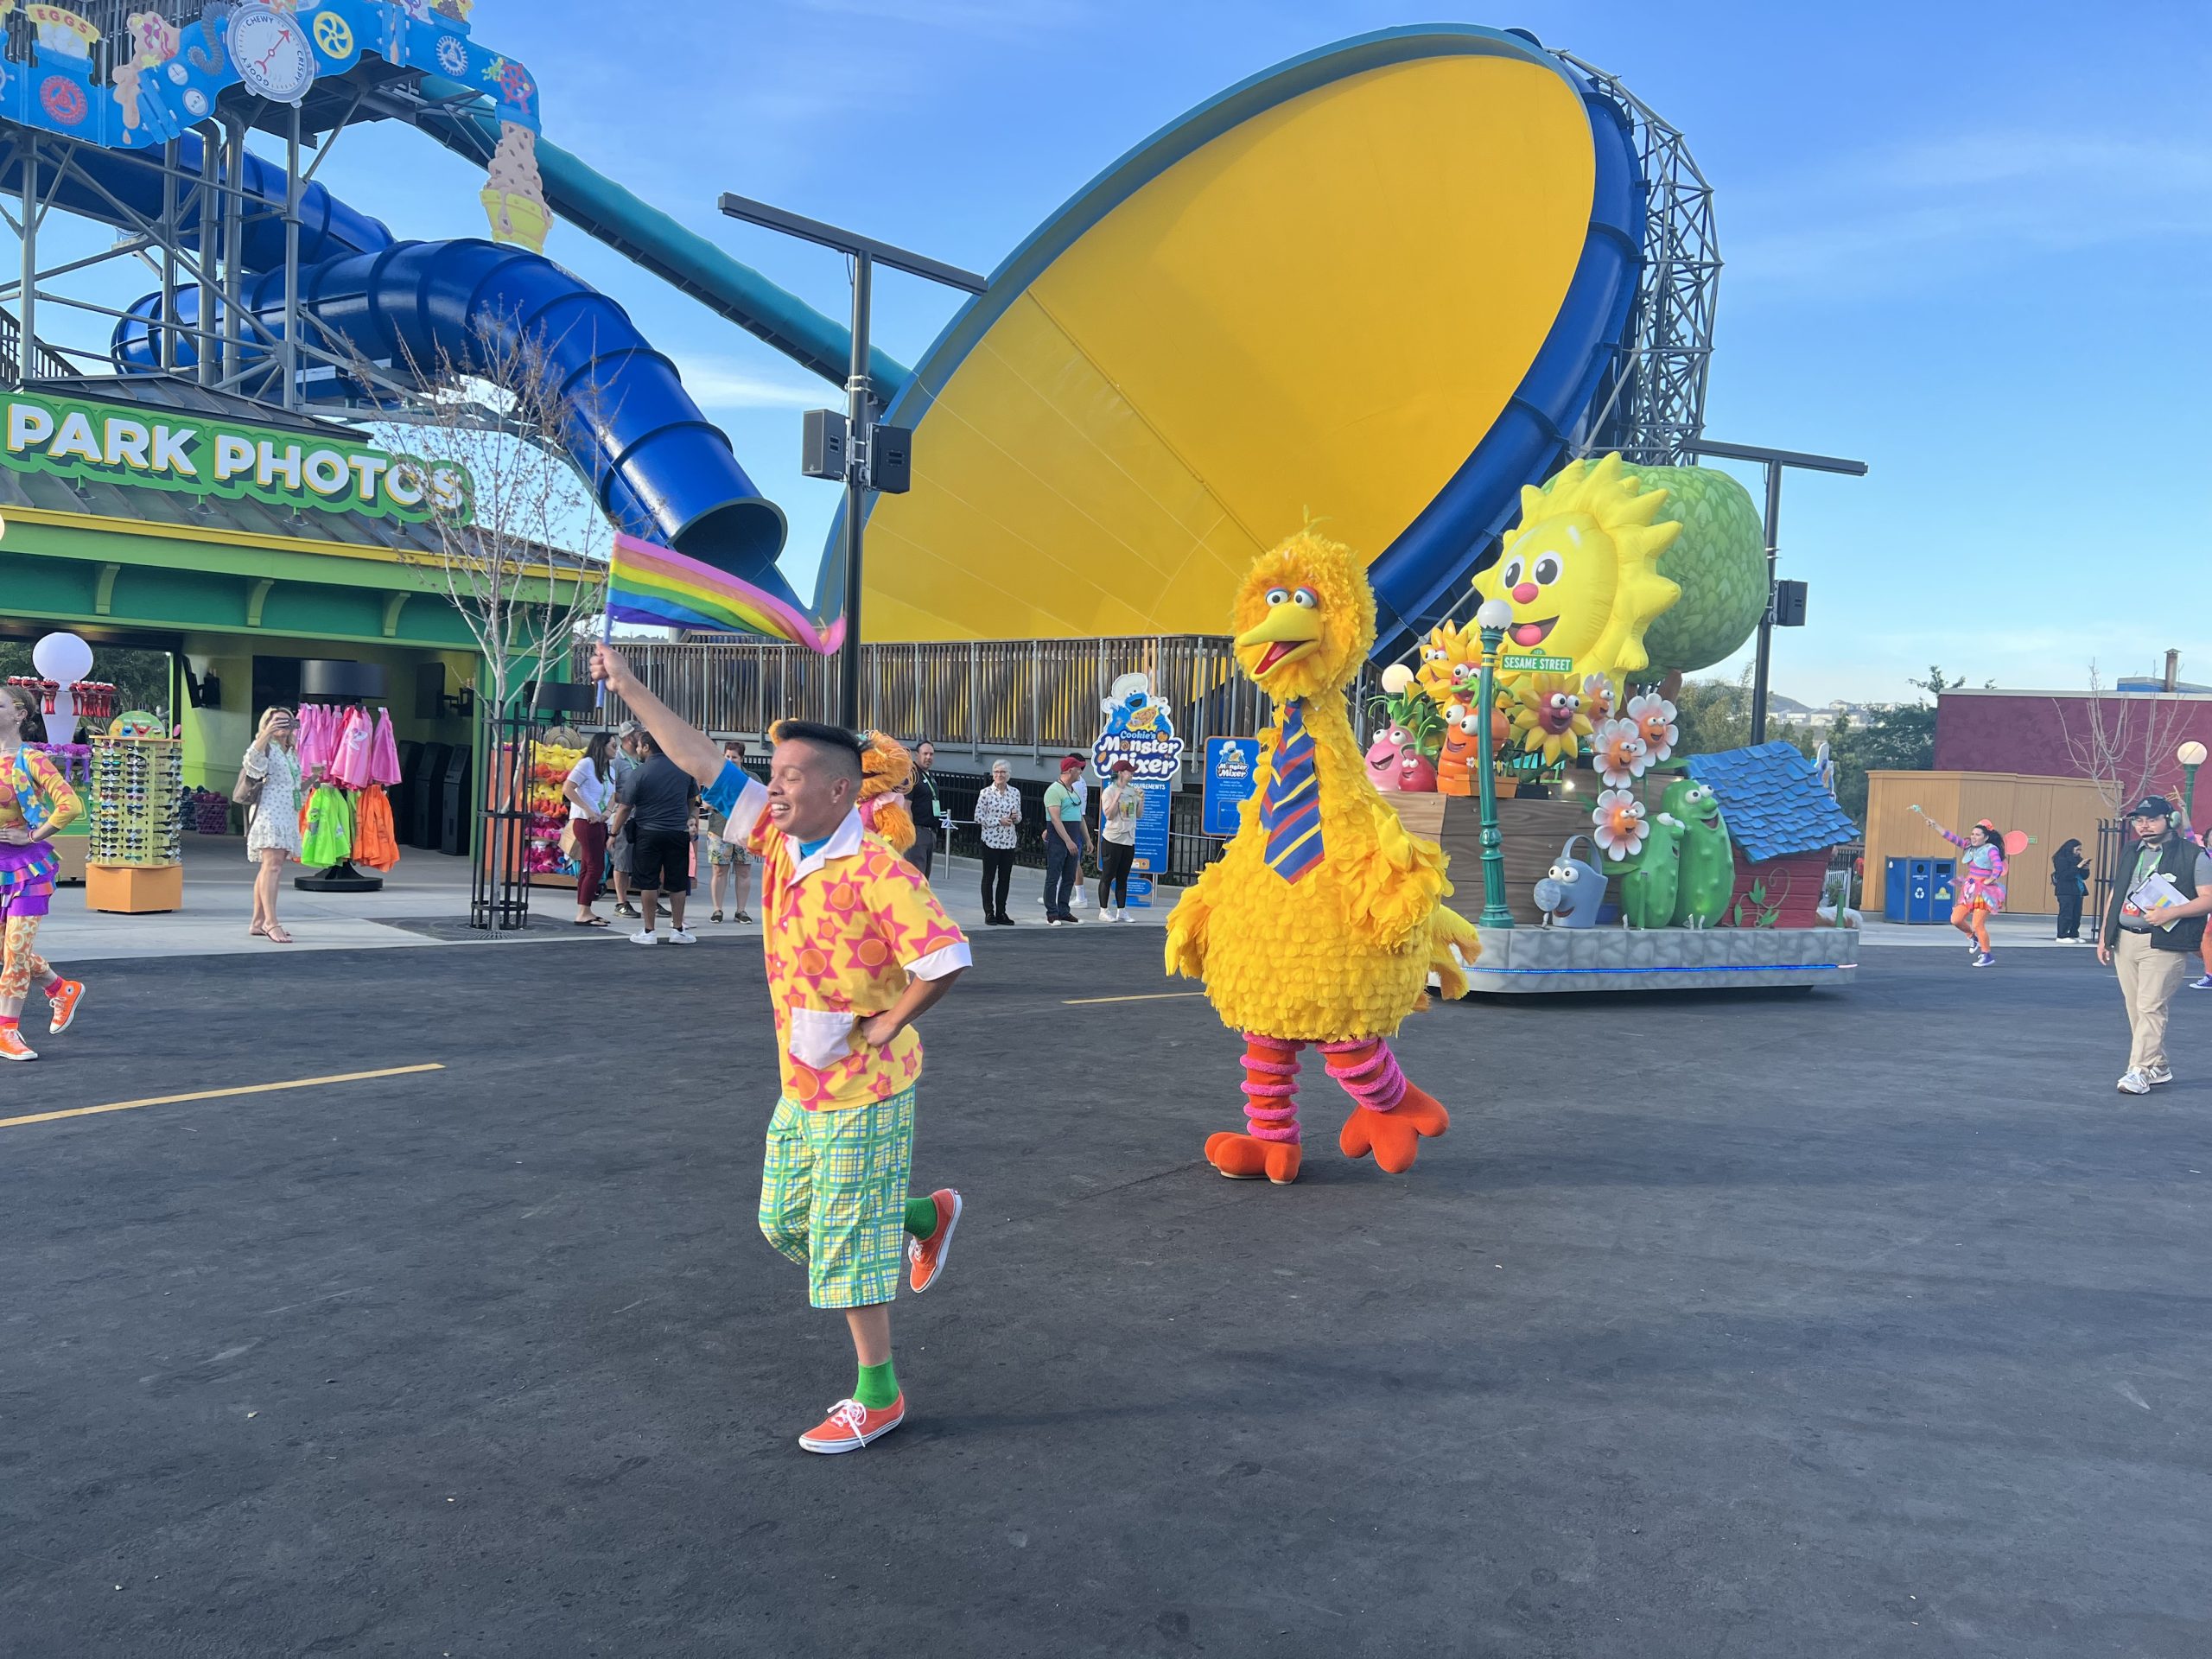 Sesame Place Theme Parks in Philadelphia and San Diego